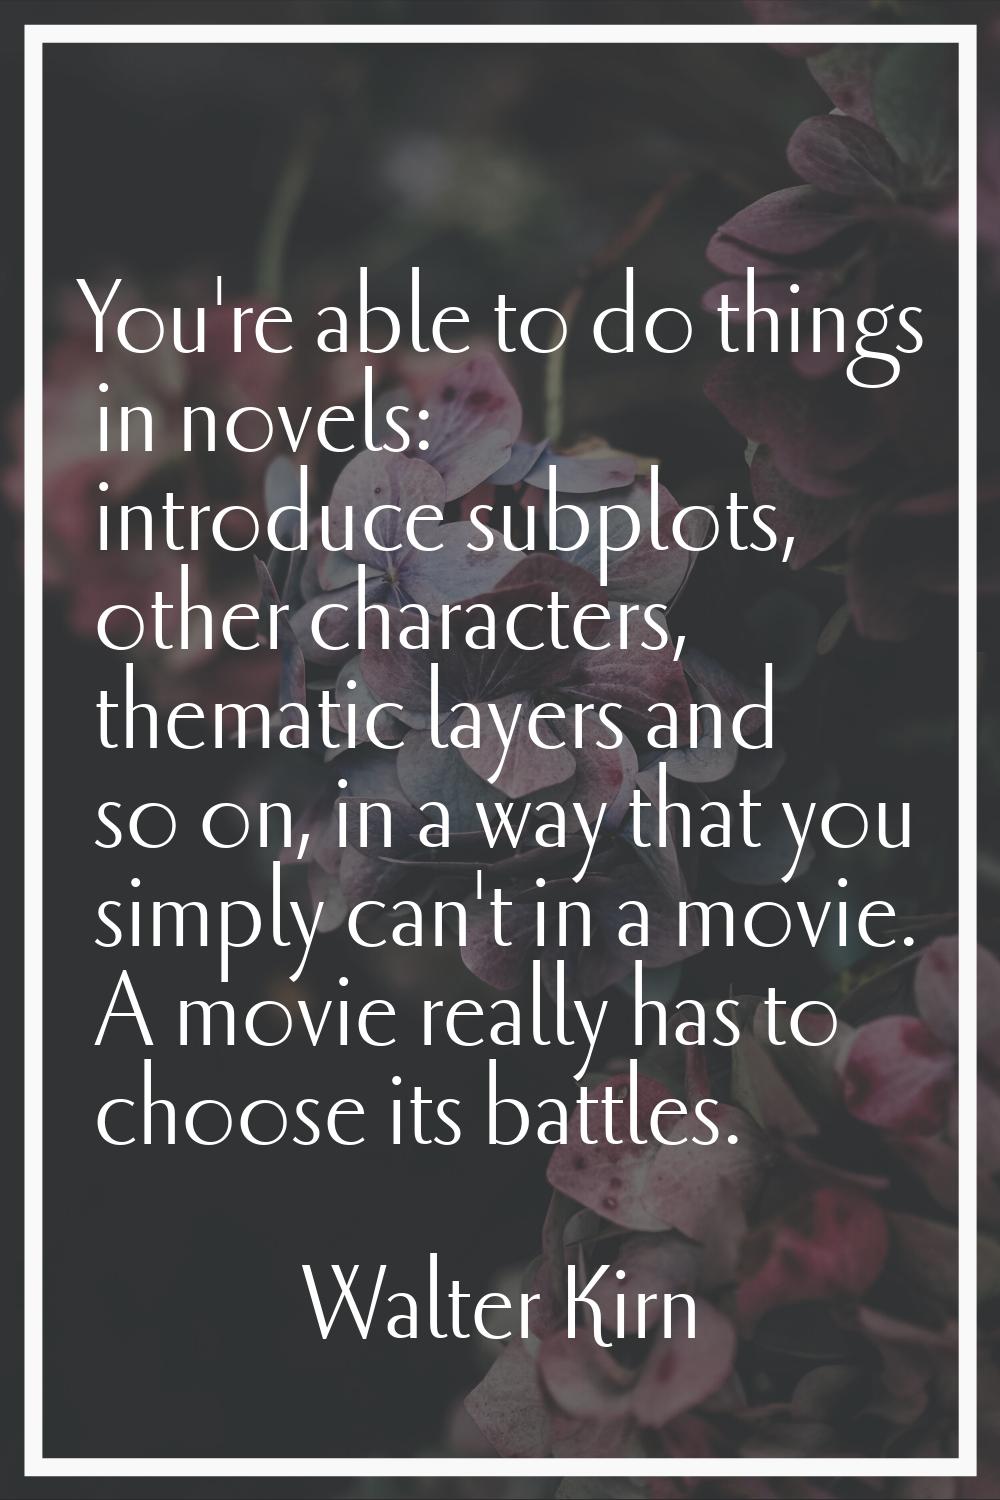 You're able to do things in novels: introduce subplots, other characters, thematic layers and so on